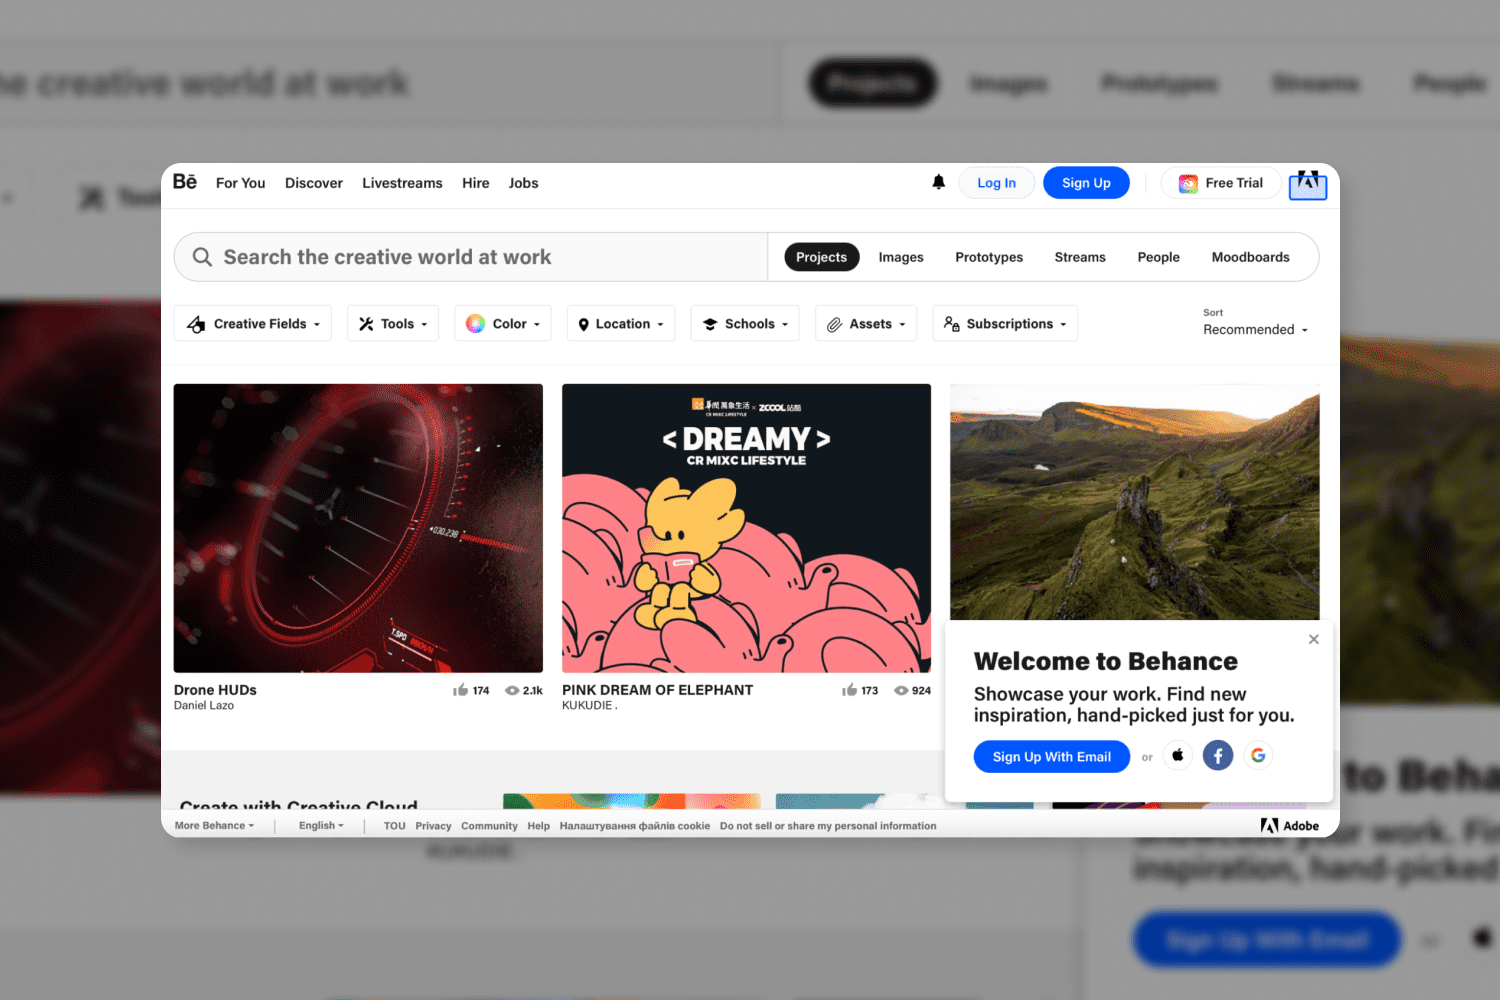 Screenshot of the main page of the Behance website.